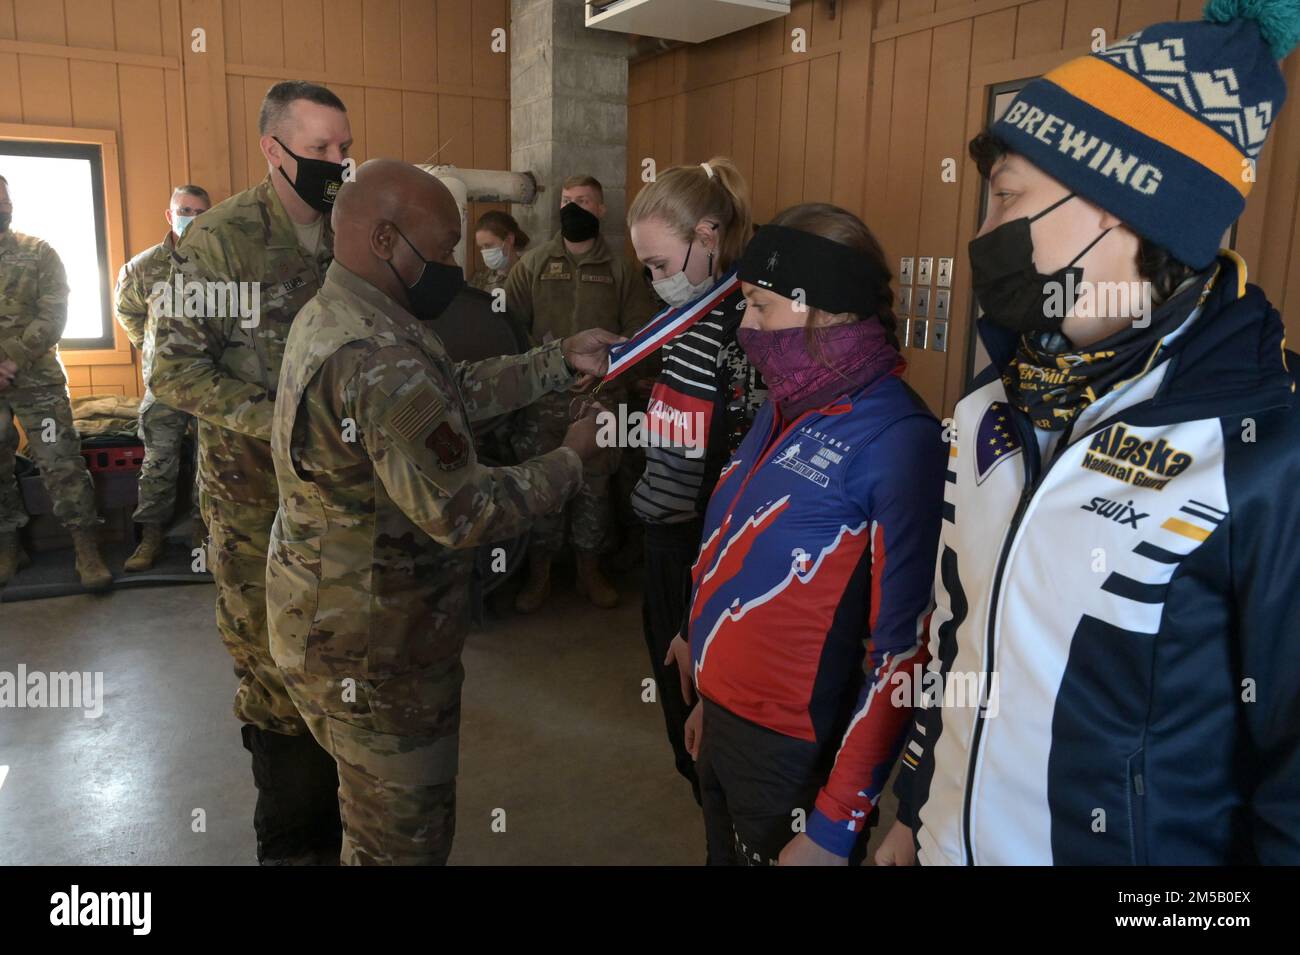 U.S. Air Force Chief Master Sgt. Tony L. Whitehead, the Senior Enlisted Advisor of the National Guard, left, places a first place medal around the neck of Spc. Sydney Kautz, of the 188th Engineer Company, of the North Dakota Army National Guard, during an awards ceremony at the Chief of the National Guard Bureau Biathlon Championship held at Camp Ripley, Minn., Feb. 11-17, 2022. She was also on the four-member North Dakota team that placed second in the women's overall category of the competition with several individual and group event awards in various biathlon events. Stock Photo